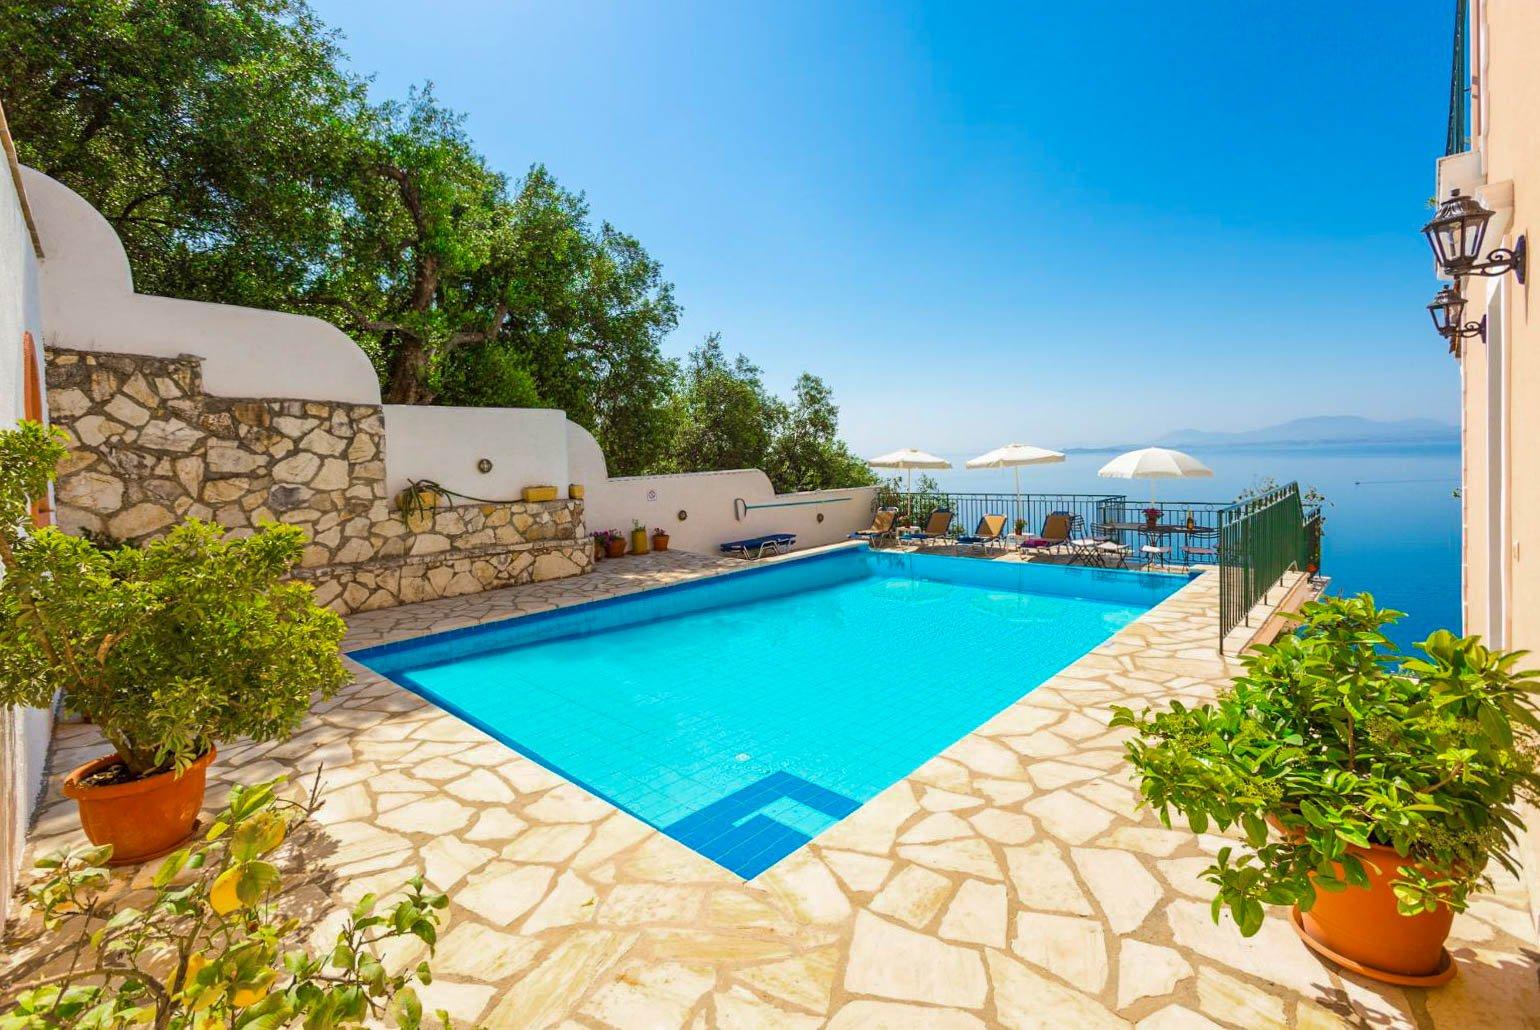 Private pool, terrace area, and sea views